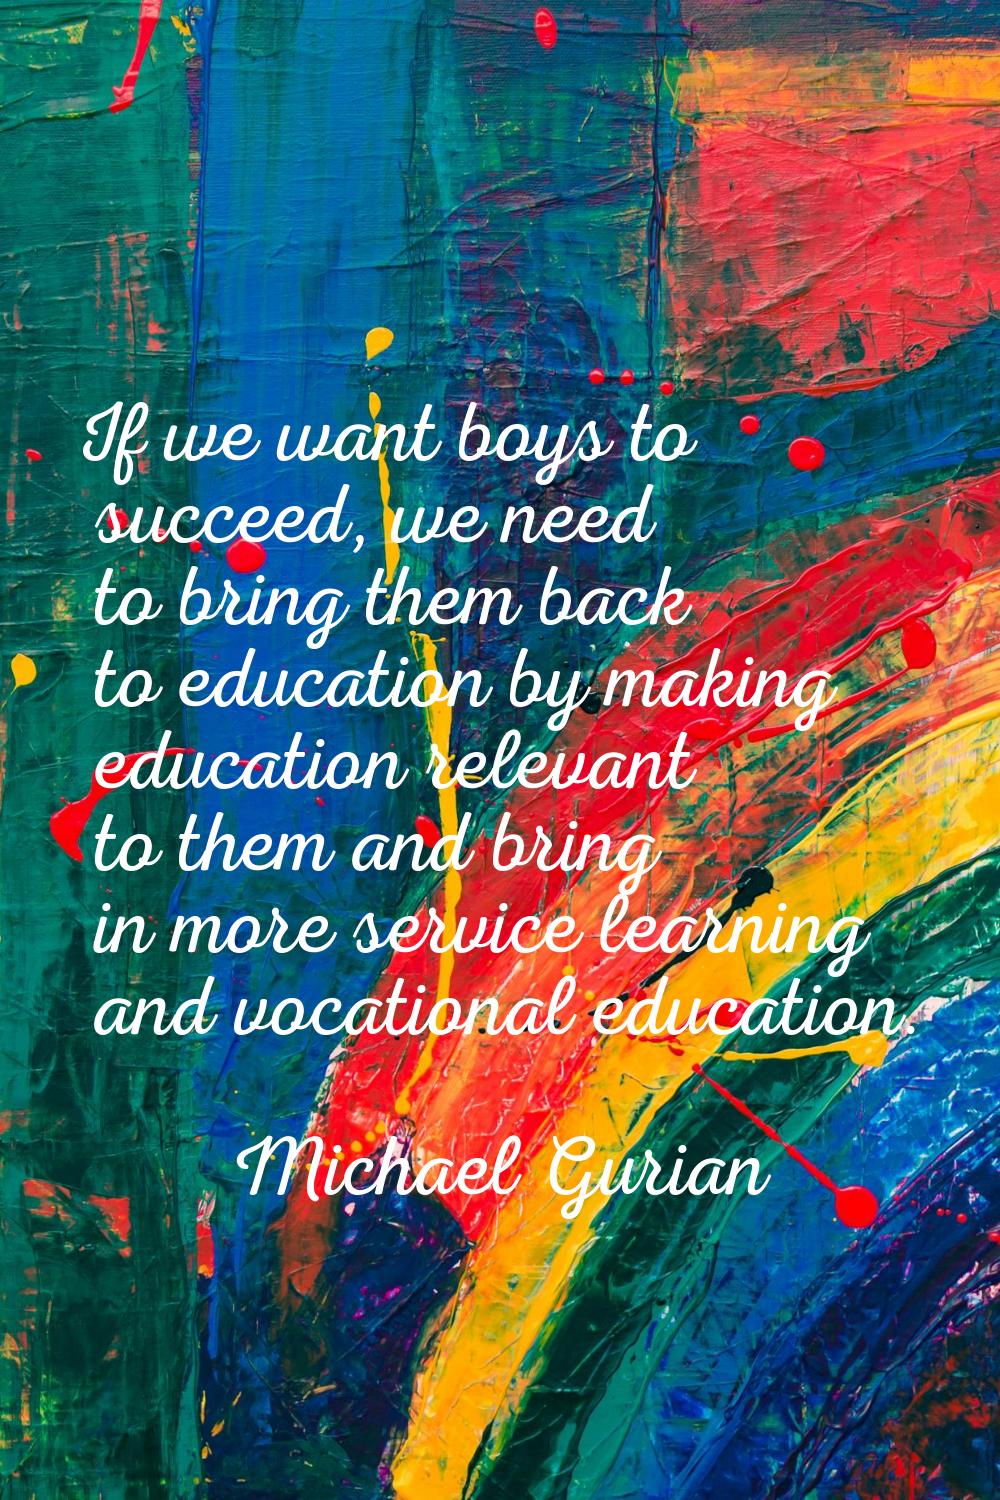 If we want boys to succeed, we need to bring them back to education by making education relevant to